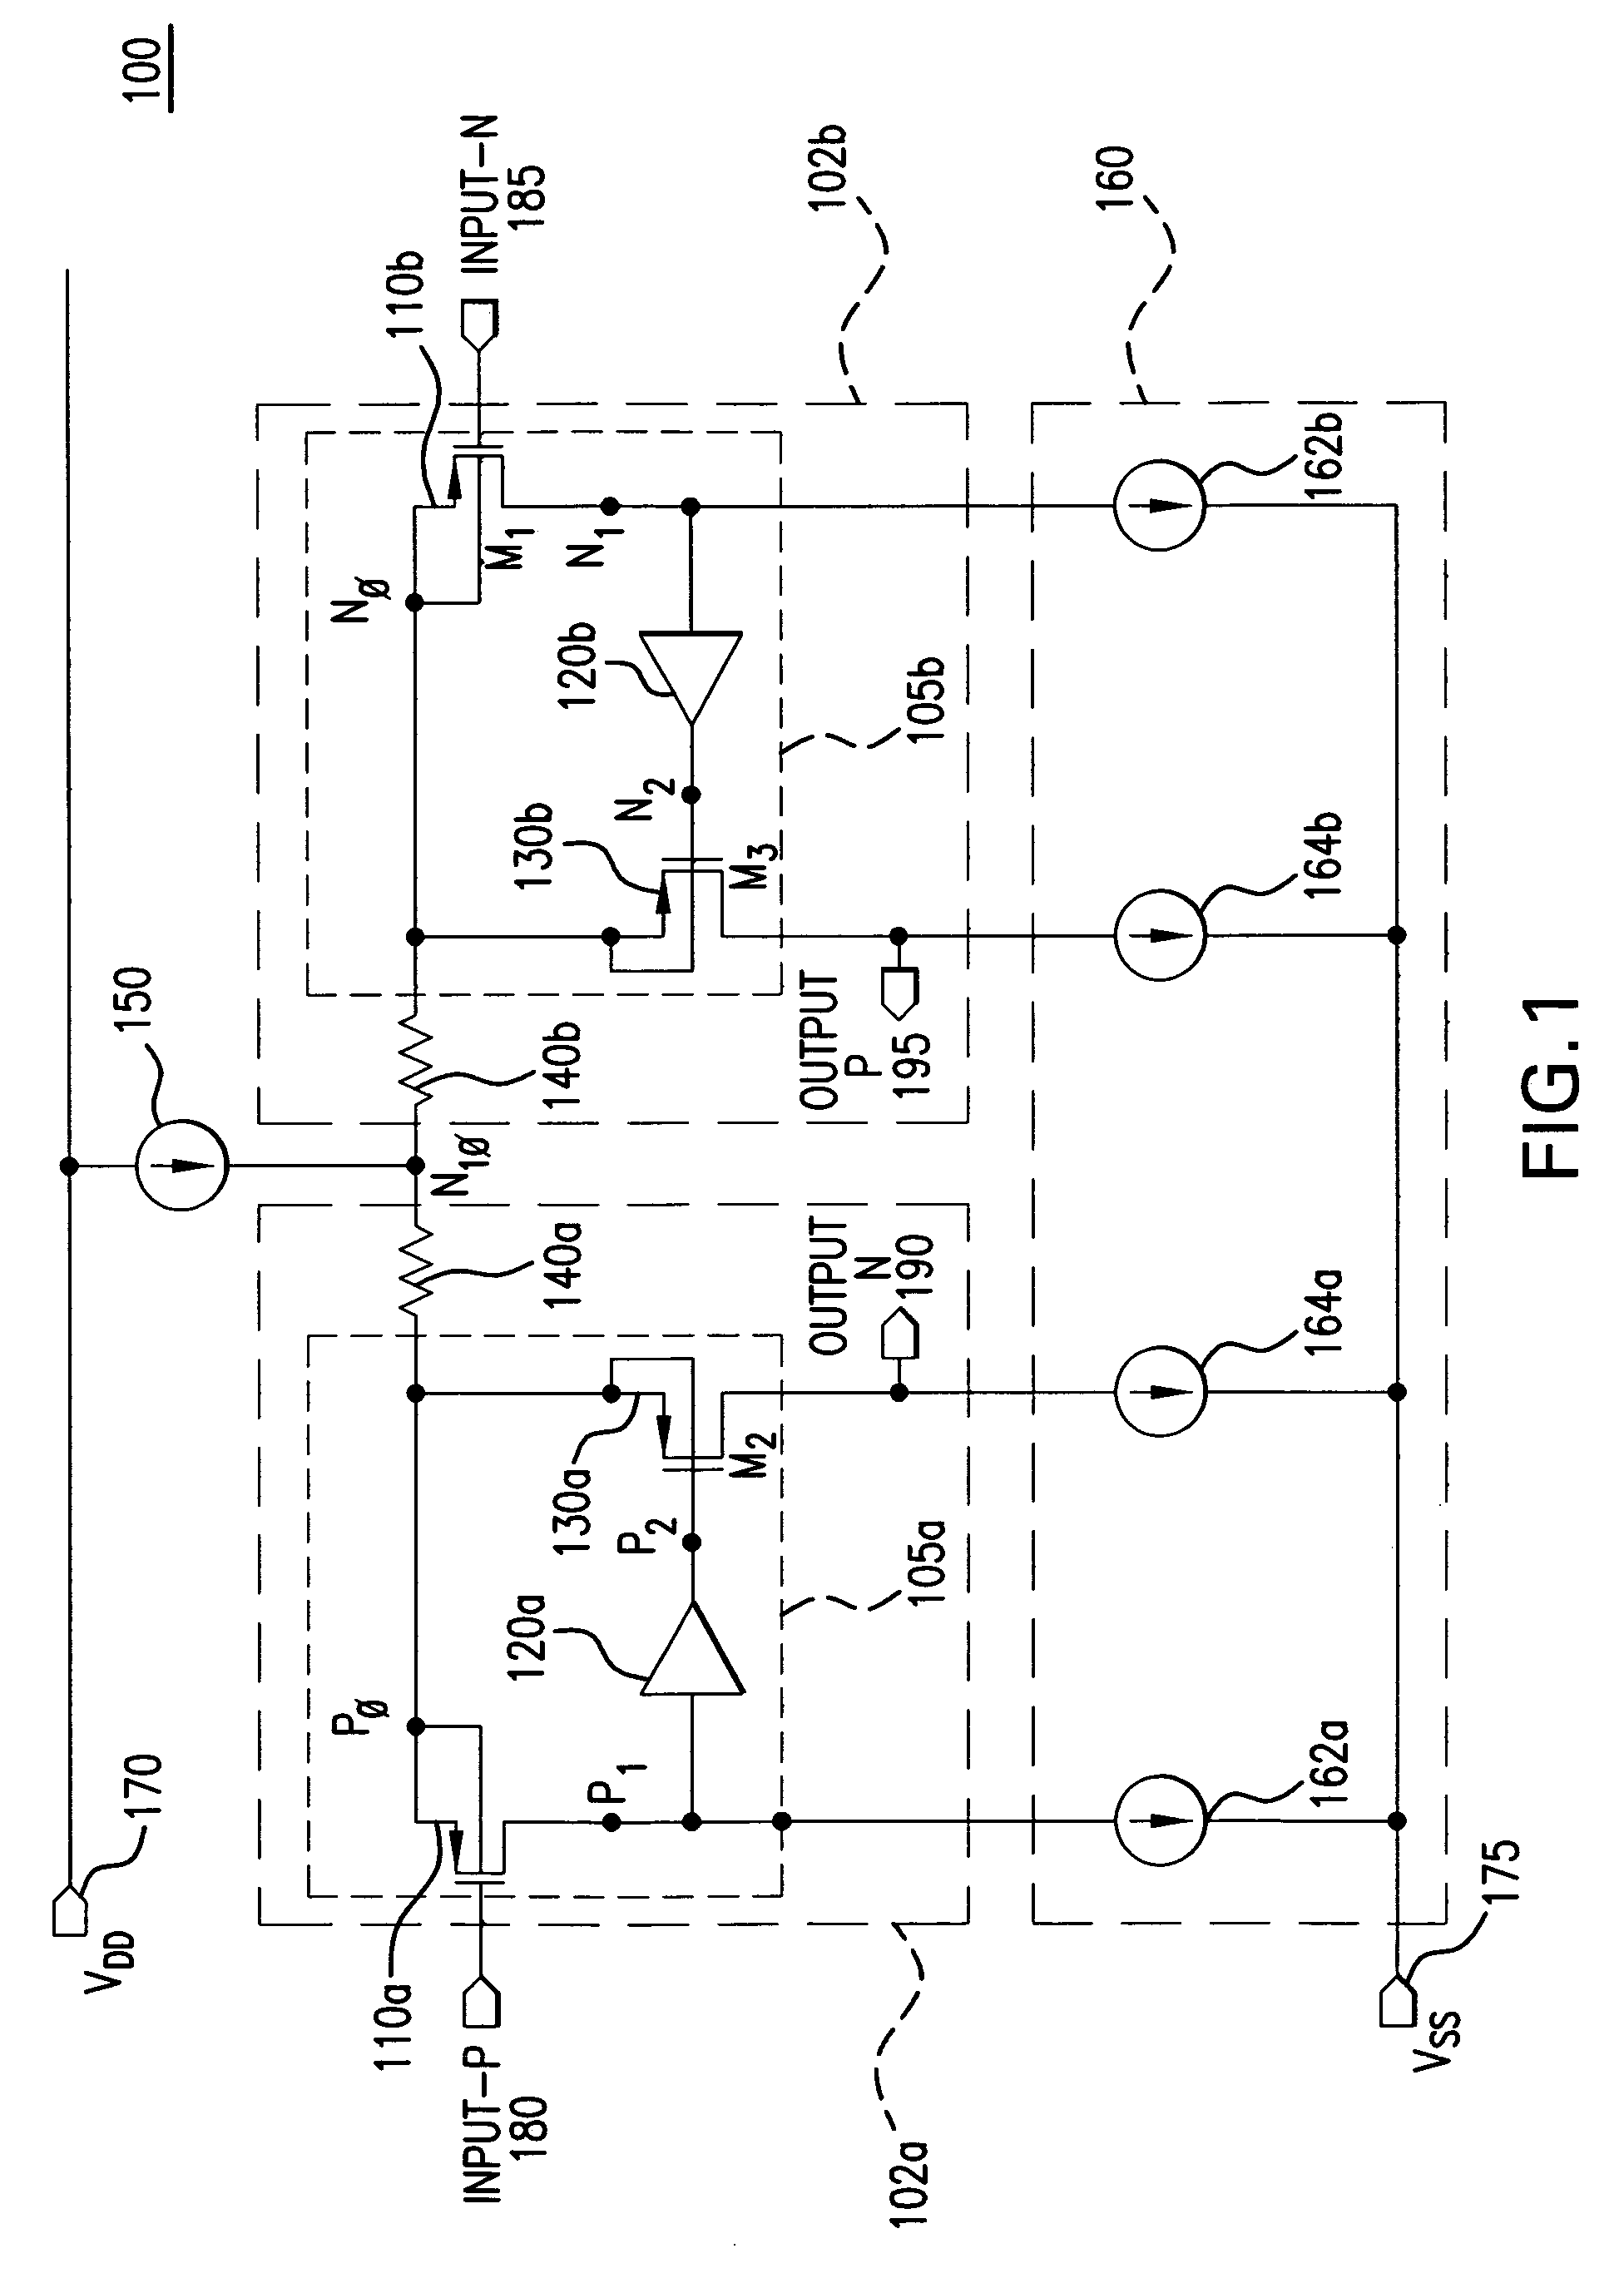 Linear low noise transconductance cell